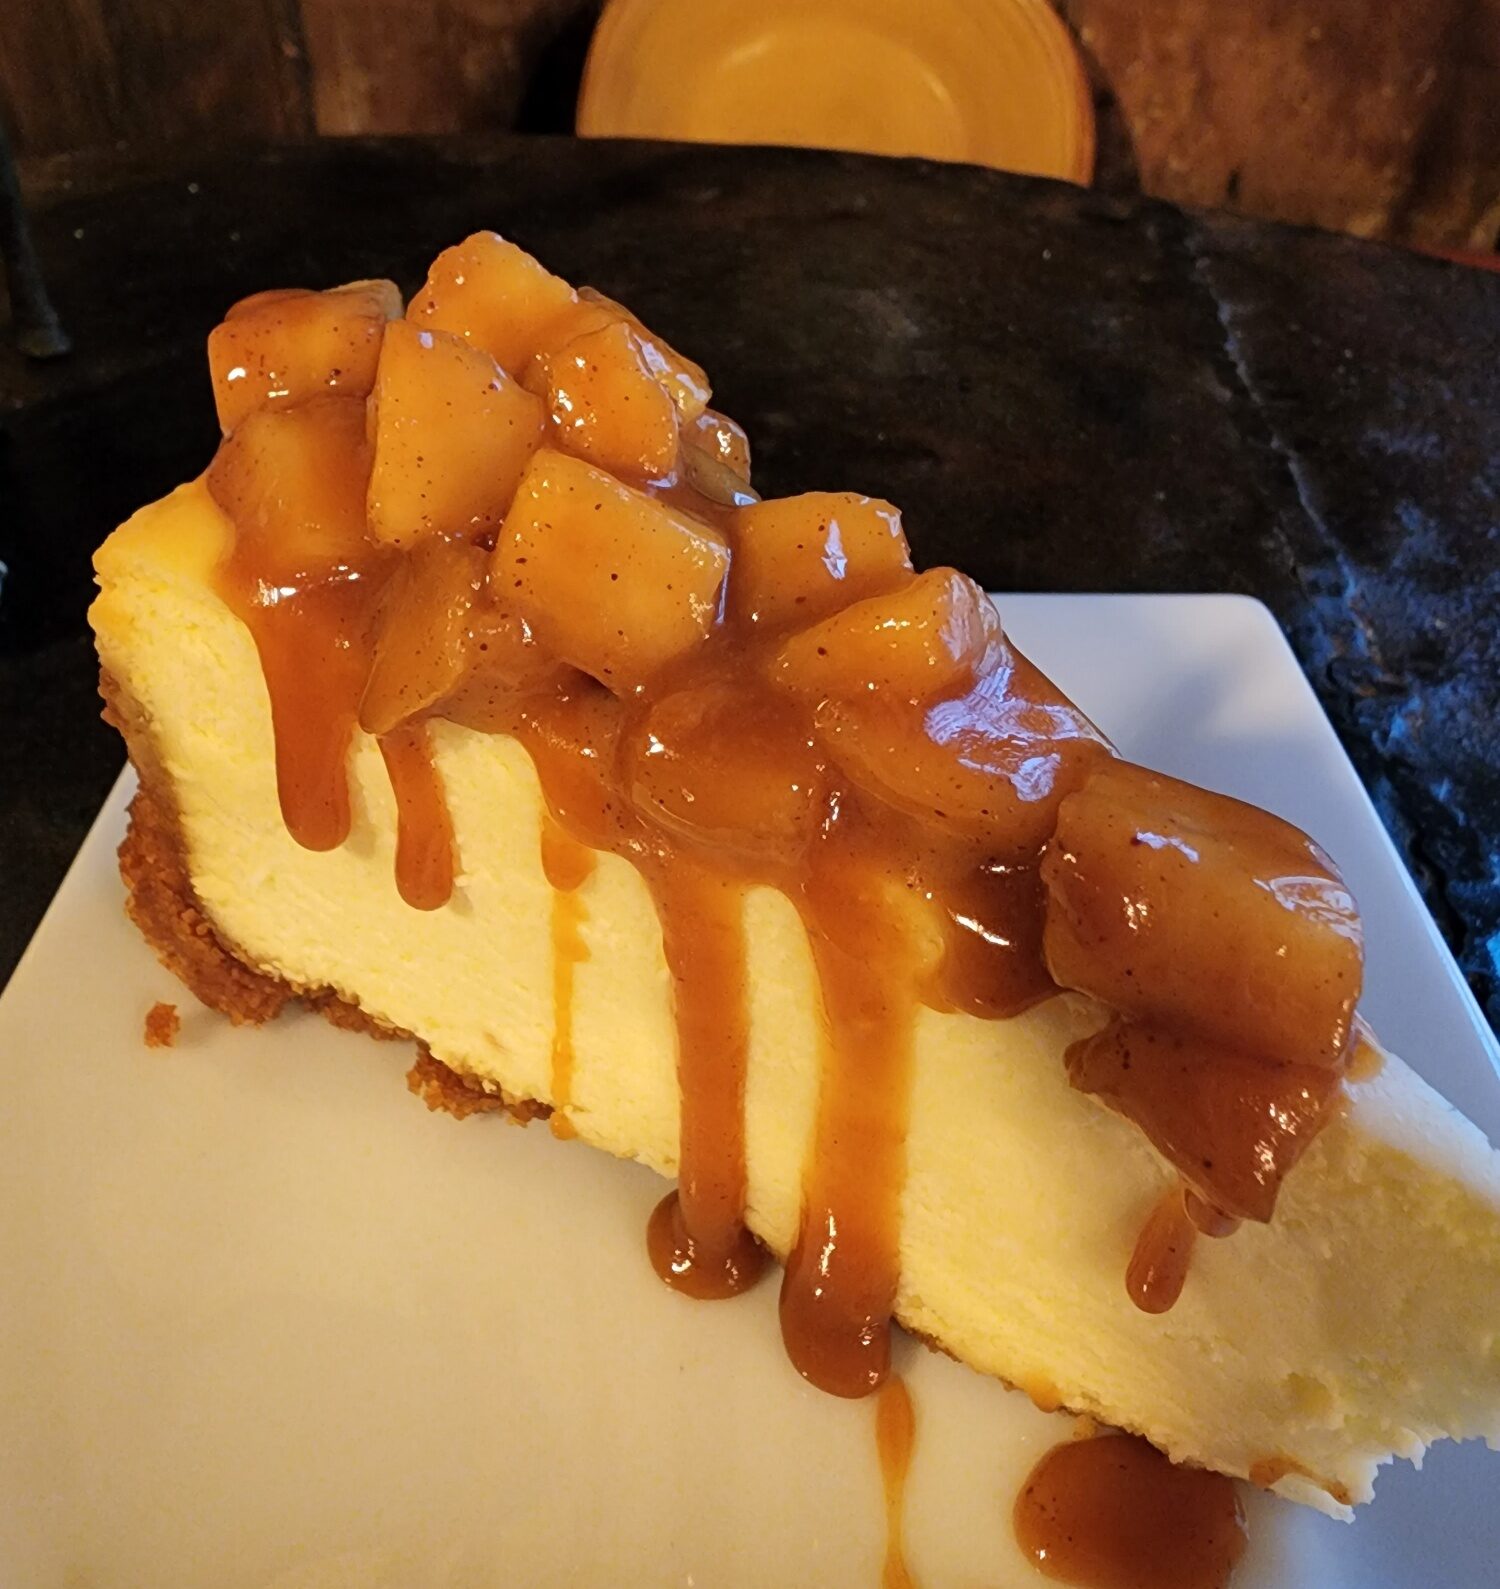 Cheesecake at M's Eatery along The Lewis and Clark National Historic Trail